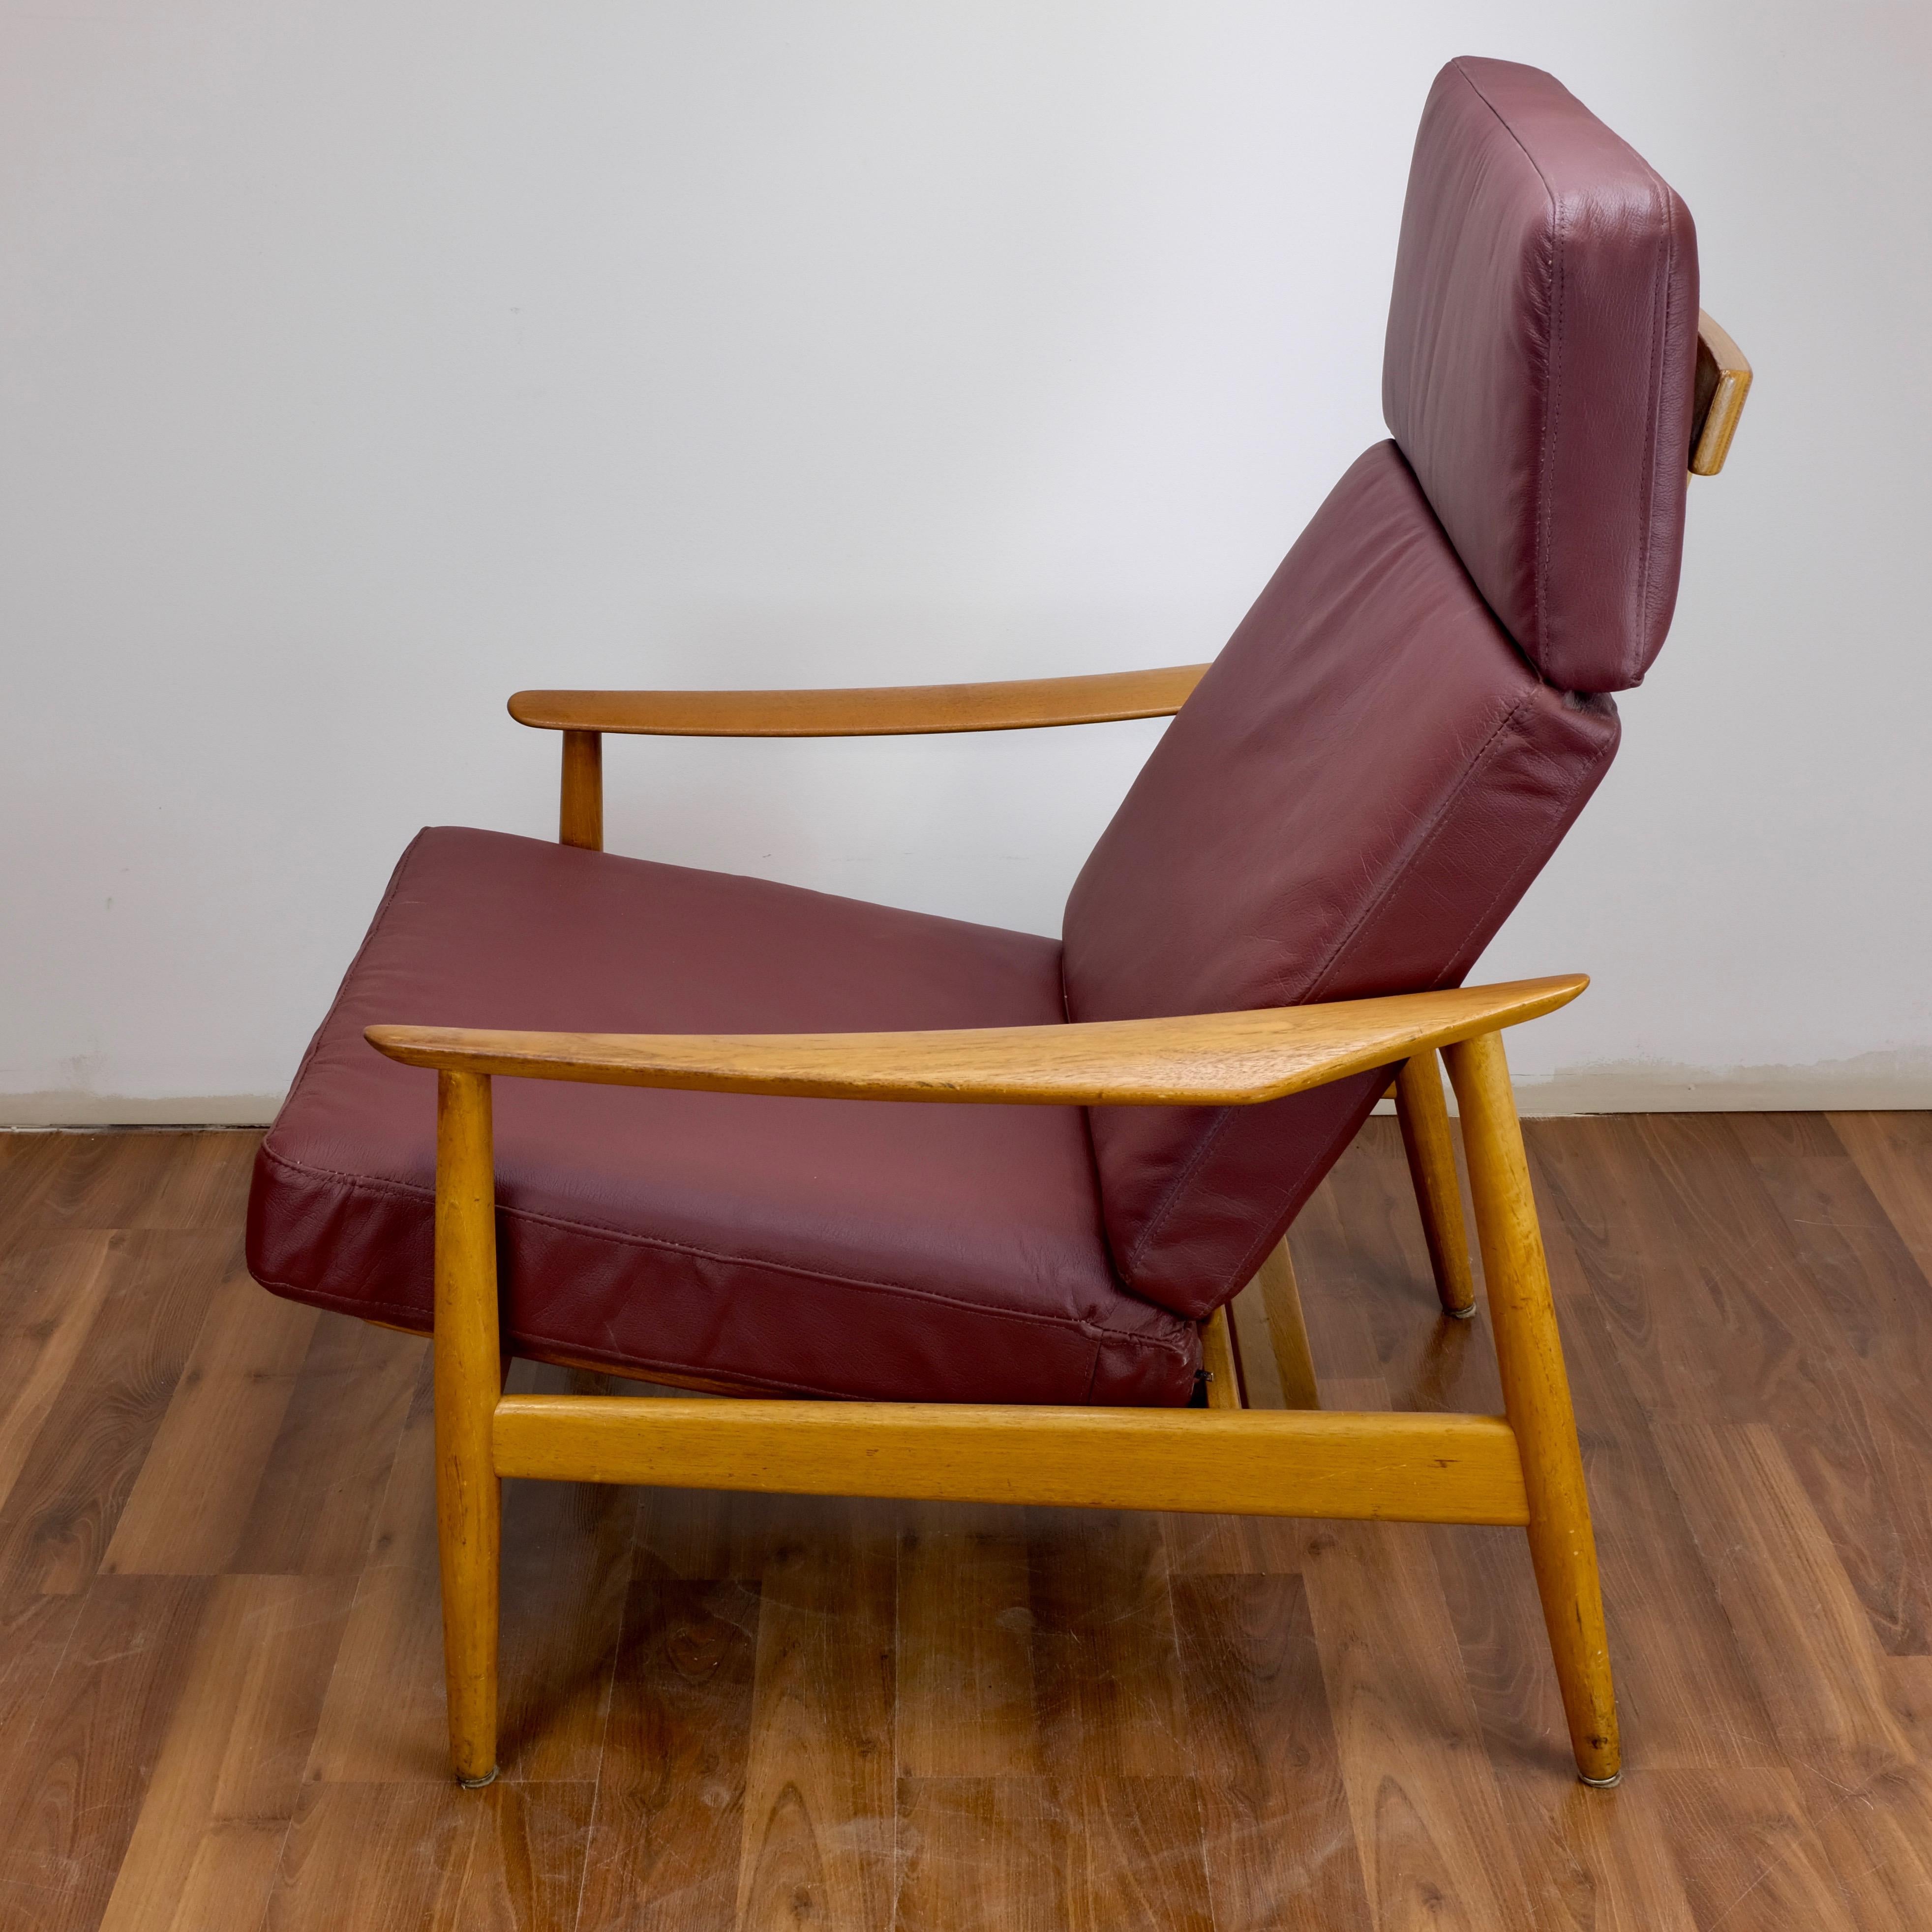 France and Søn model 164 armchair designed in 1960 by Arne Vodder.

The solid teak frame has been refinished and the loose cushions have been reupholstered in burgundy faux leather.

The seat and back can be adjusted to recline in three